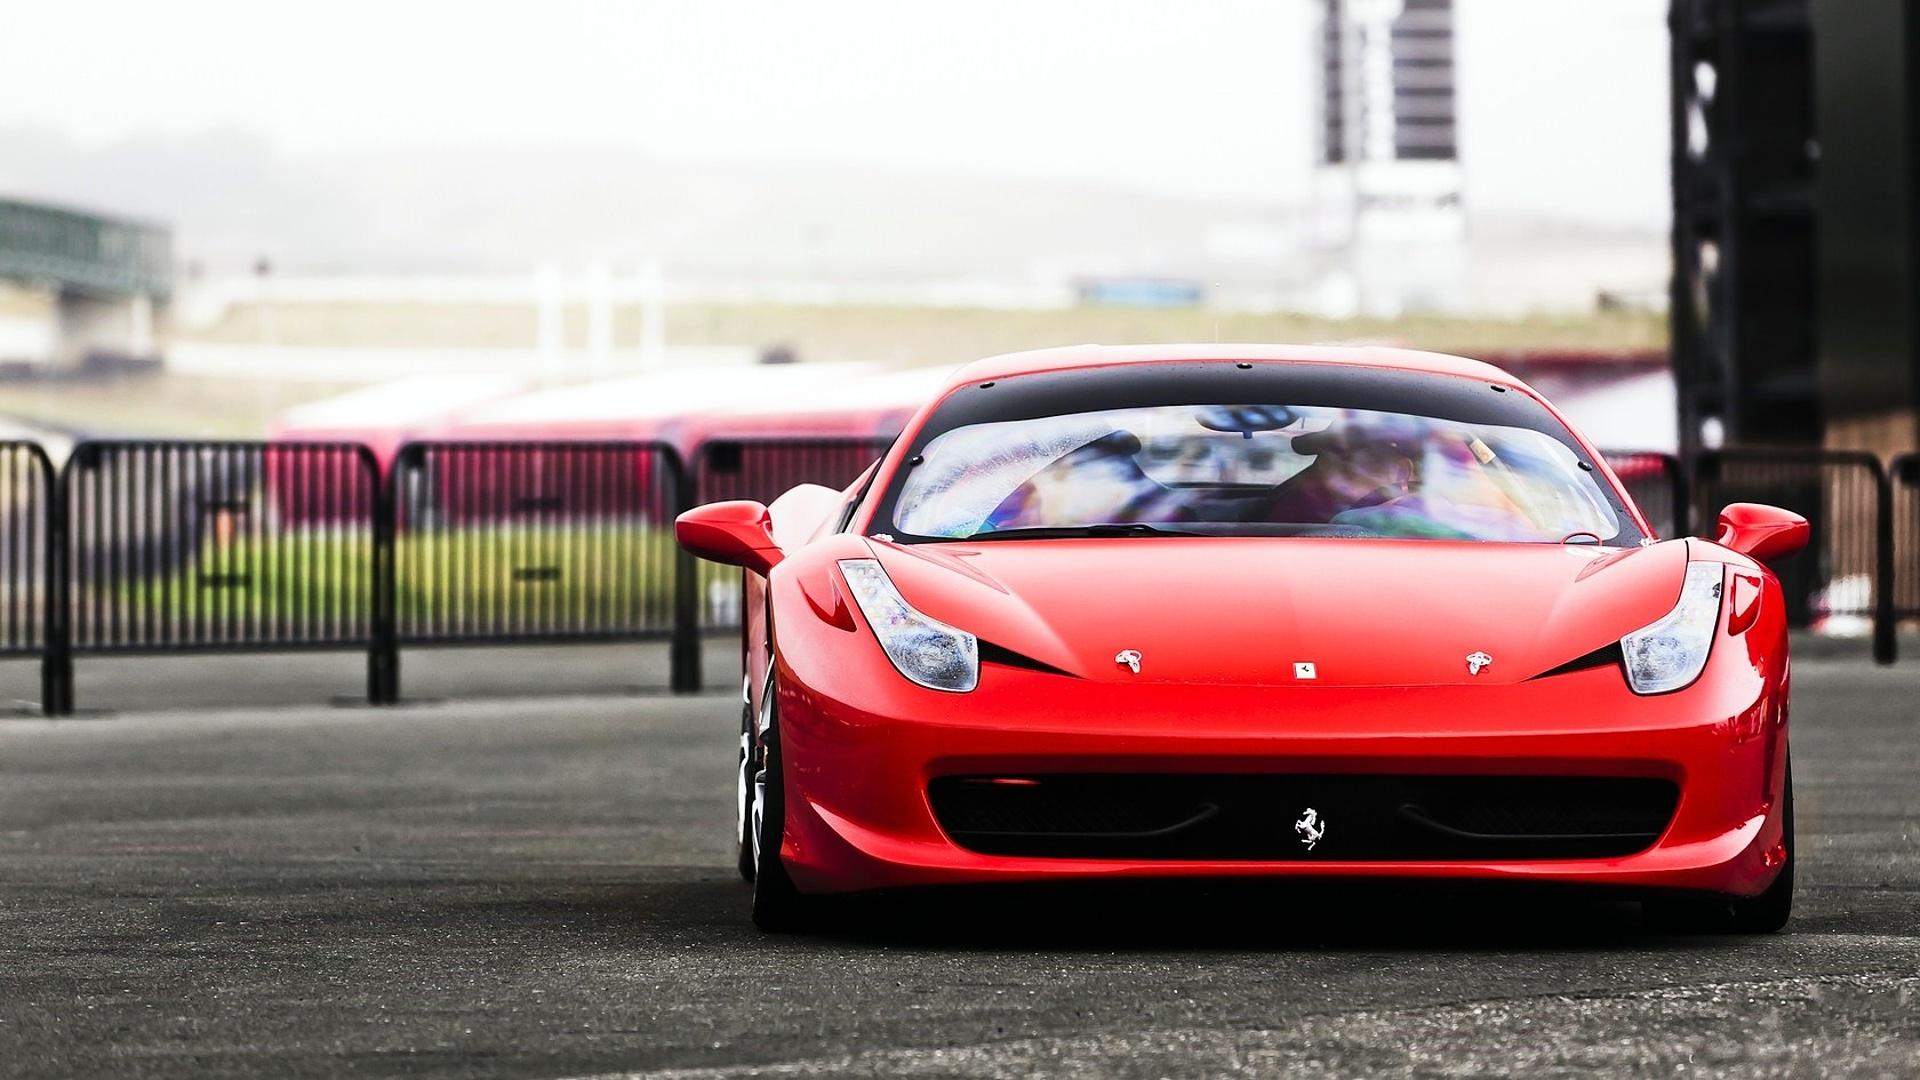 Desktop Ferrari HD P Android For Background On Car Wallpaper With